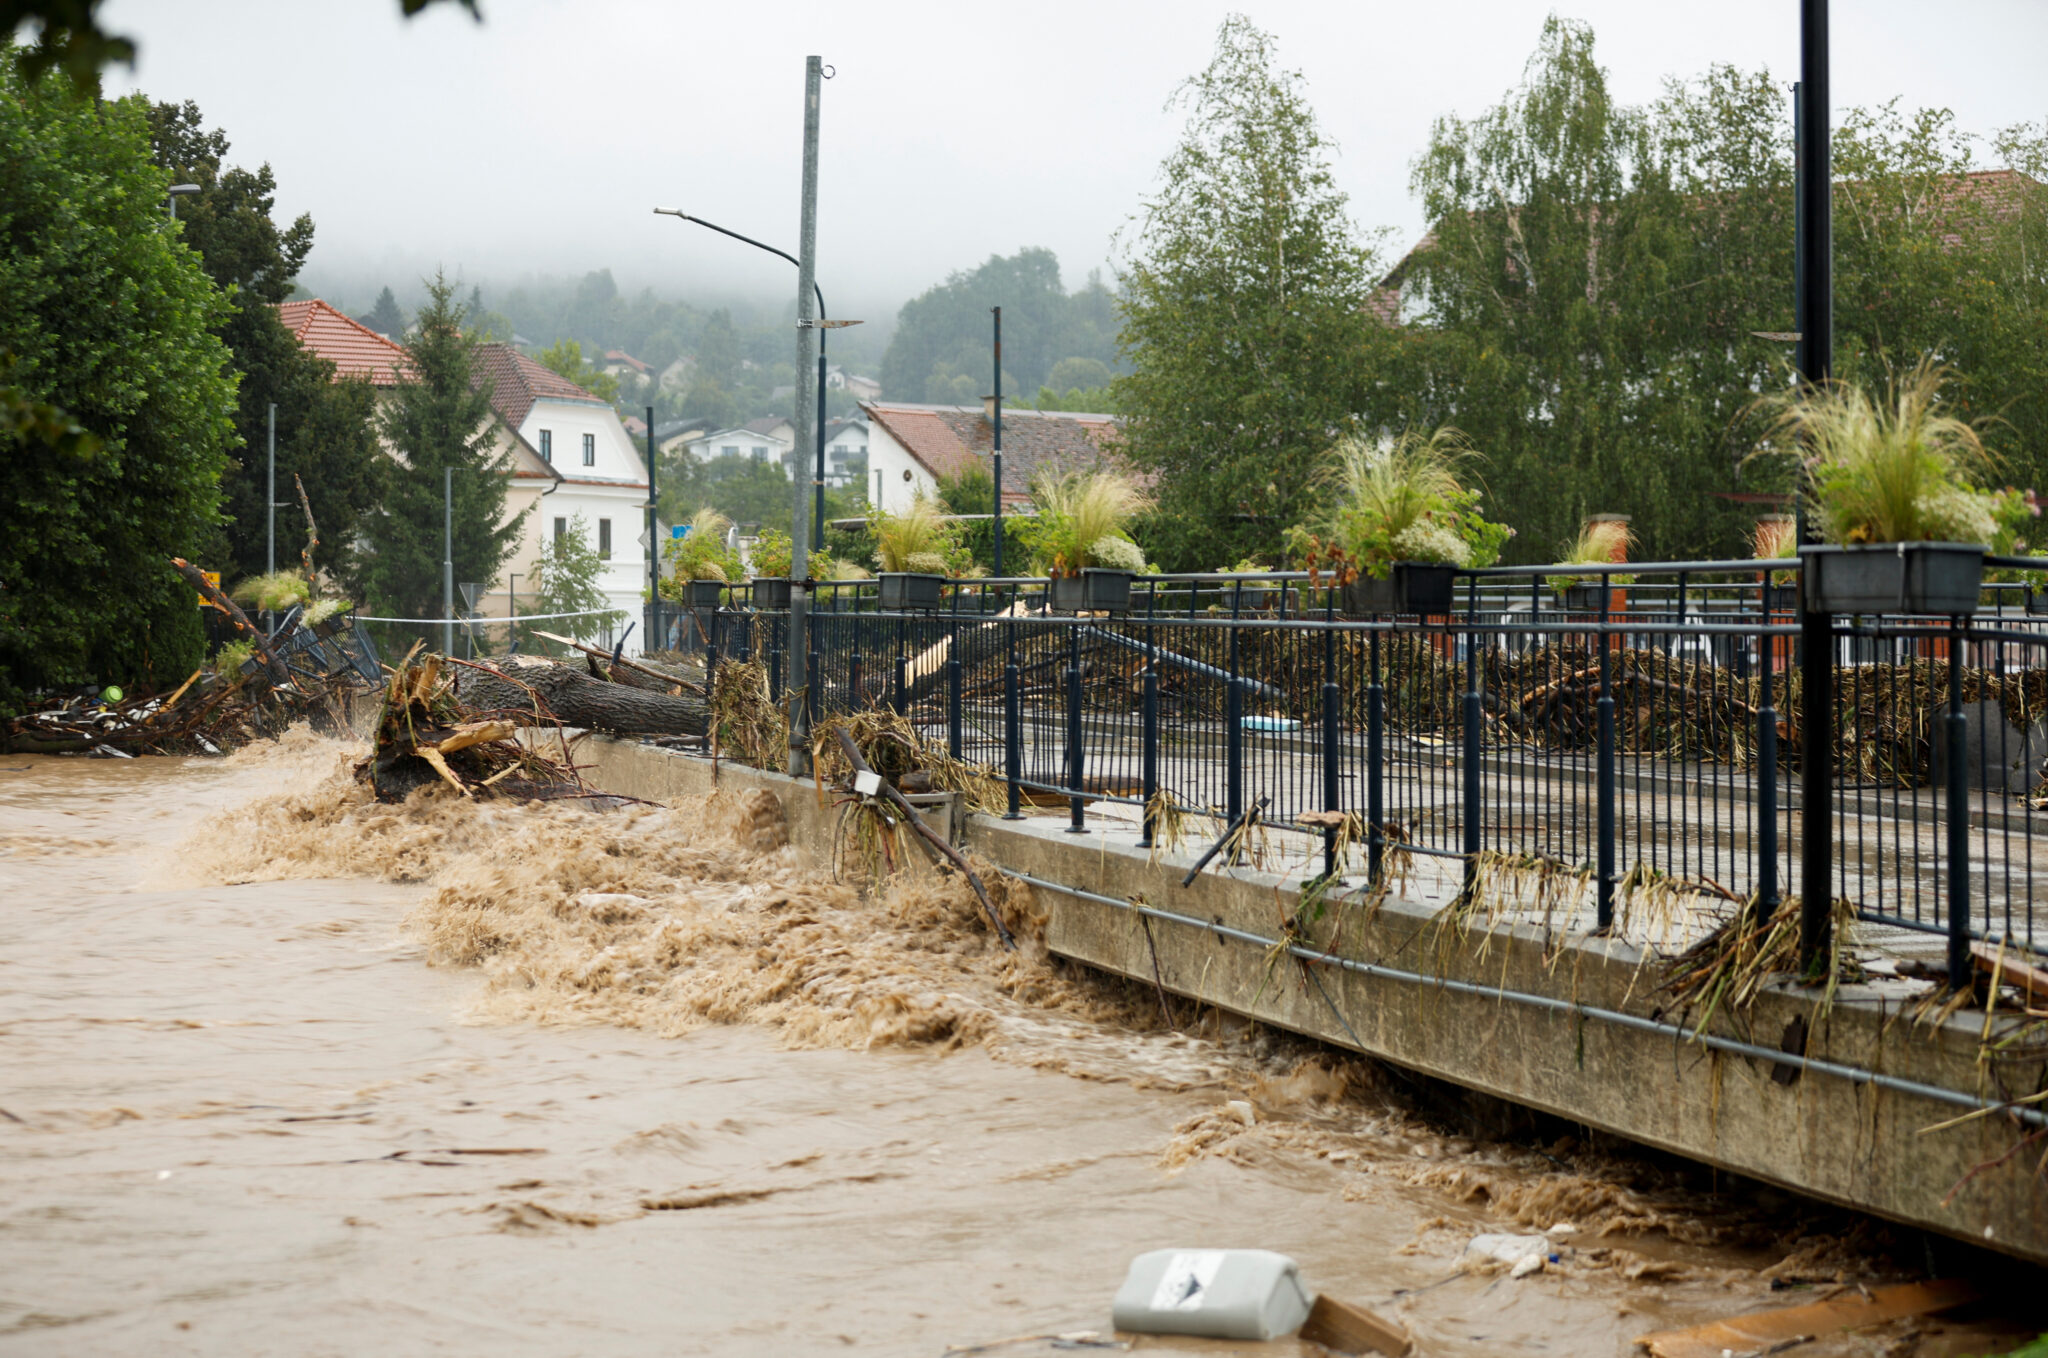 At least two die as heavy rains hit Slovenia; rescuers struggle to reach flooded areas